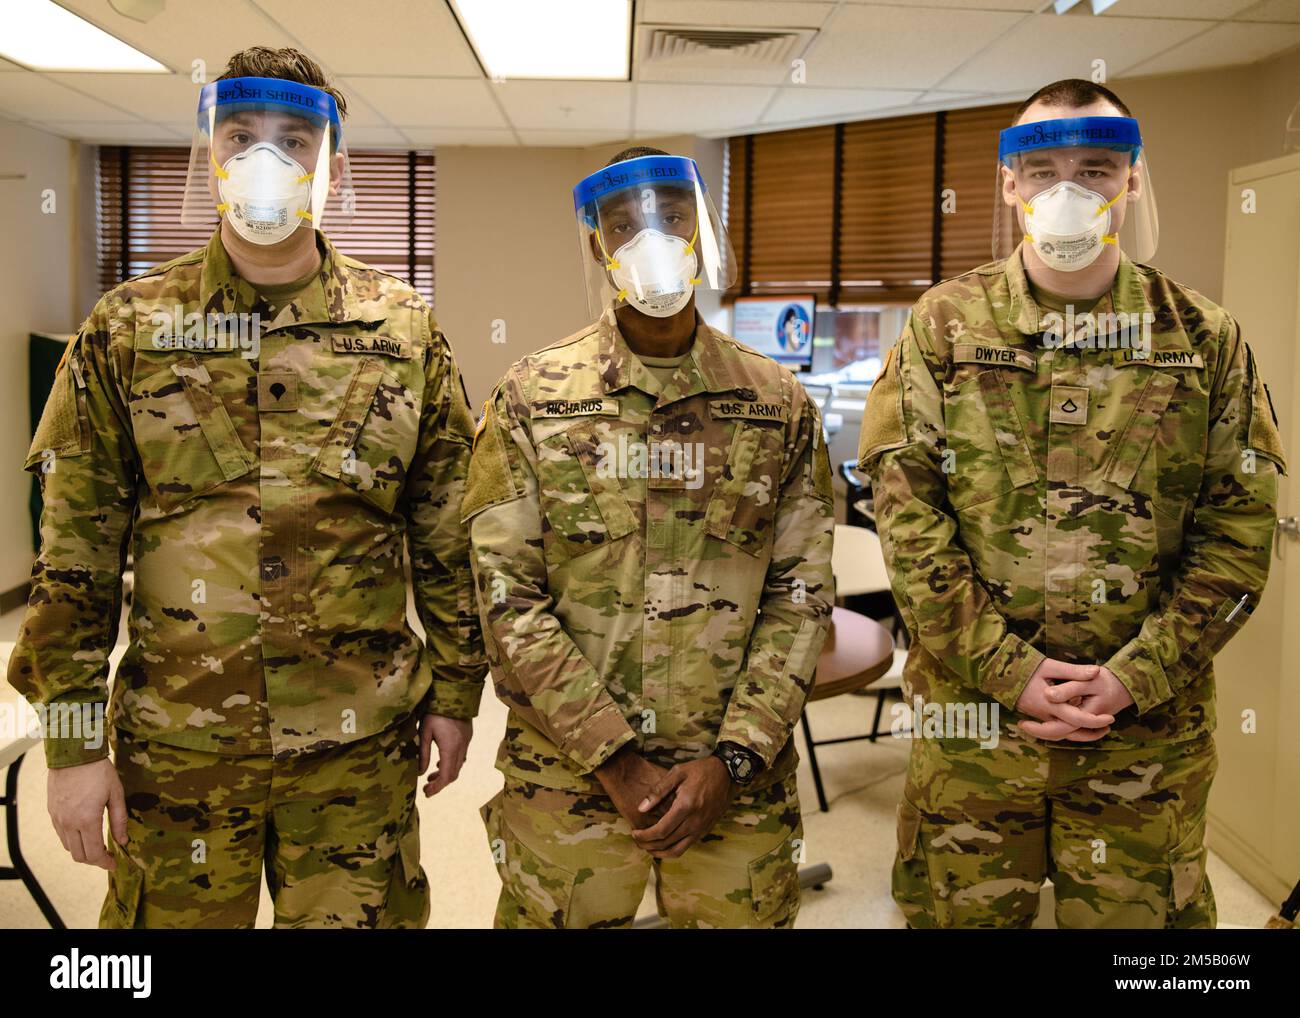 Three combat medics with the 1st Battalion, 175th Infantry Regiment Headquarters and Headquarters Company, pose for a photo at Johns Hopkins Hospital in Baltimore, Maryland. on Feb. 17, 2022. At the direction of Gov. Larry Hogan, up to 1,000 MDNG members were activated to assist state and local health officials with their COVID-19 response to include the distribution of COVID-19 test kits, 20 million KN95 and N95 masks, and other personal protective equipment and to provide support to skilled nursing facilities, hospitals, and testing sites. Stock Photo